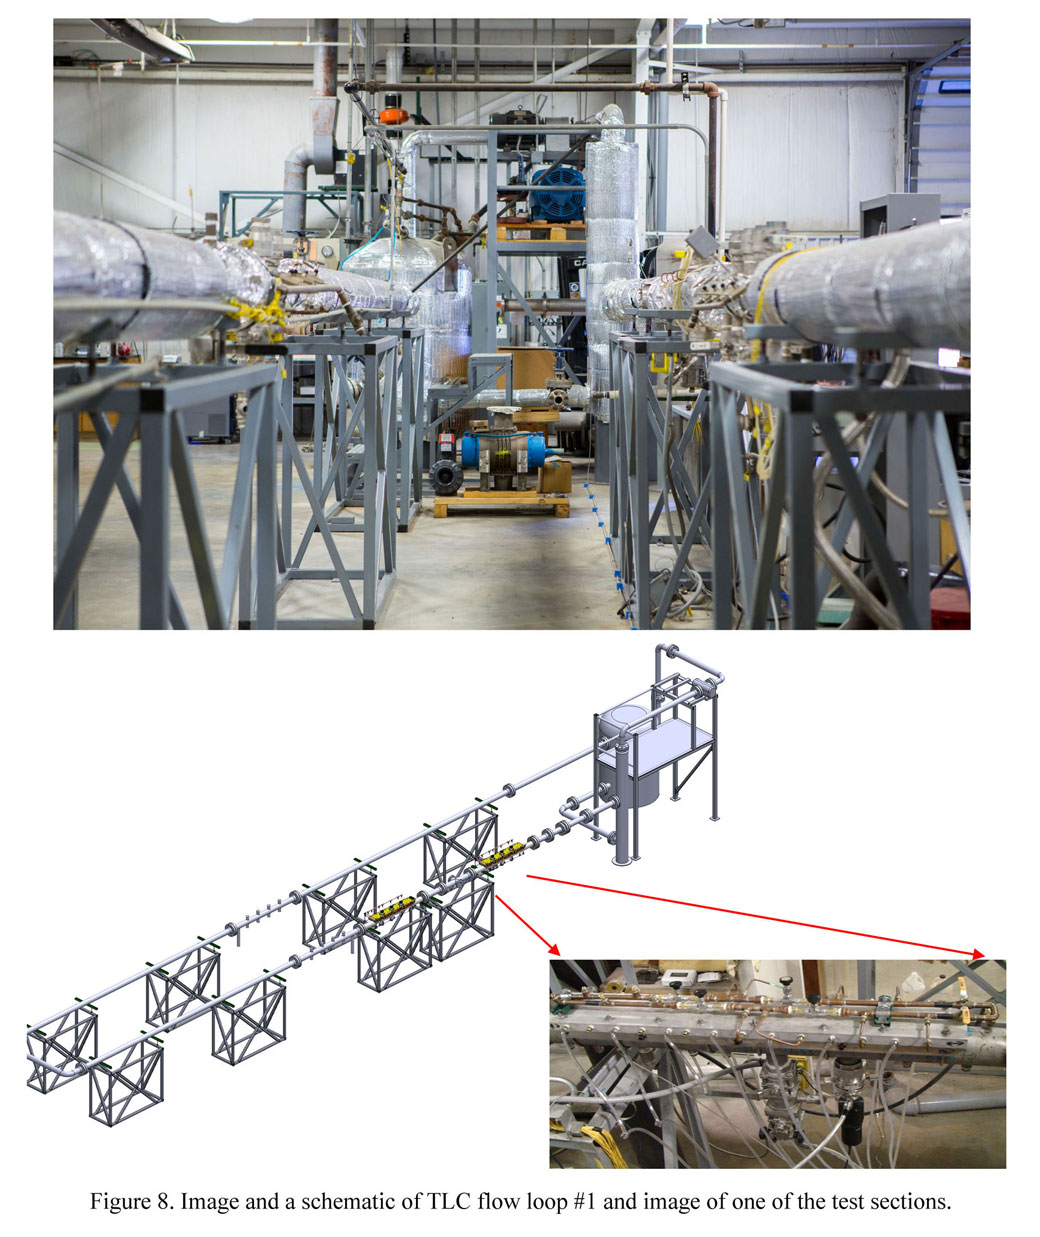 Image and a schematic of TLC flow loop #1 and image of one of the test sections